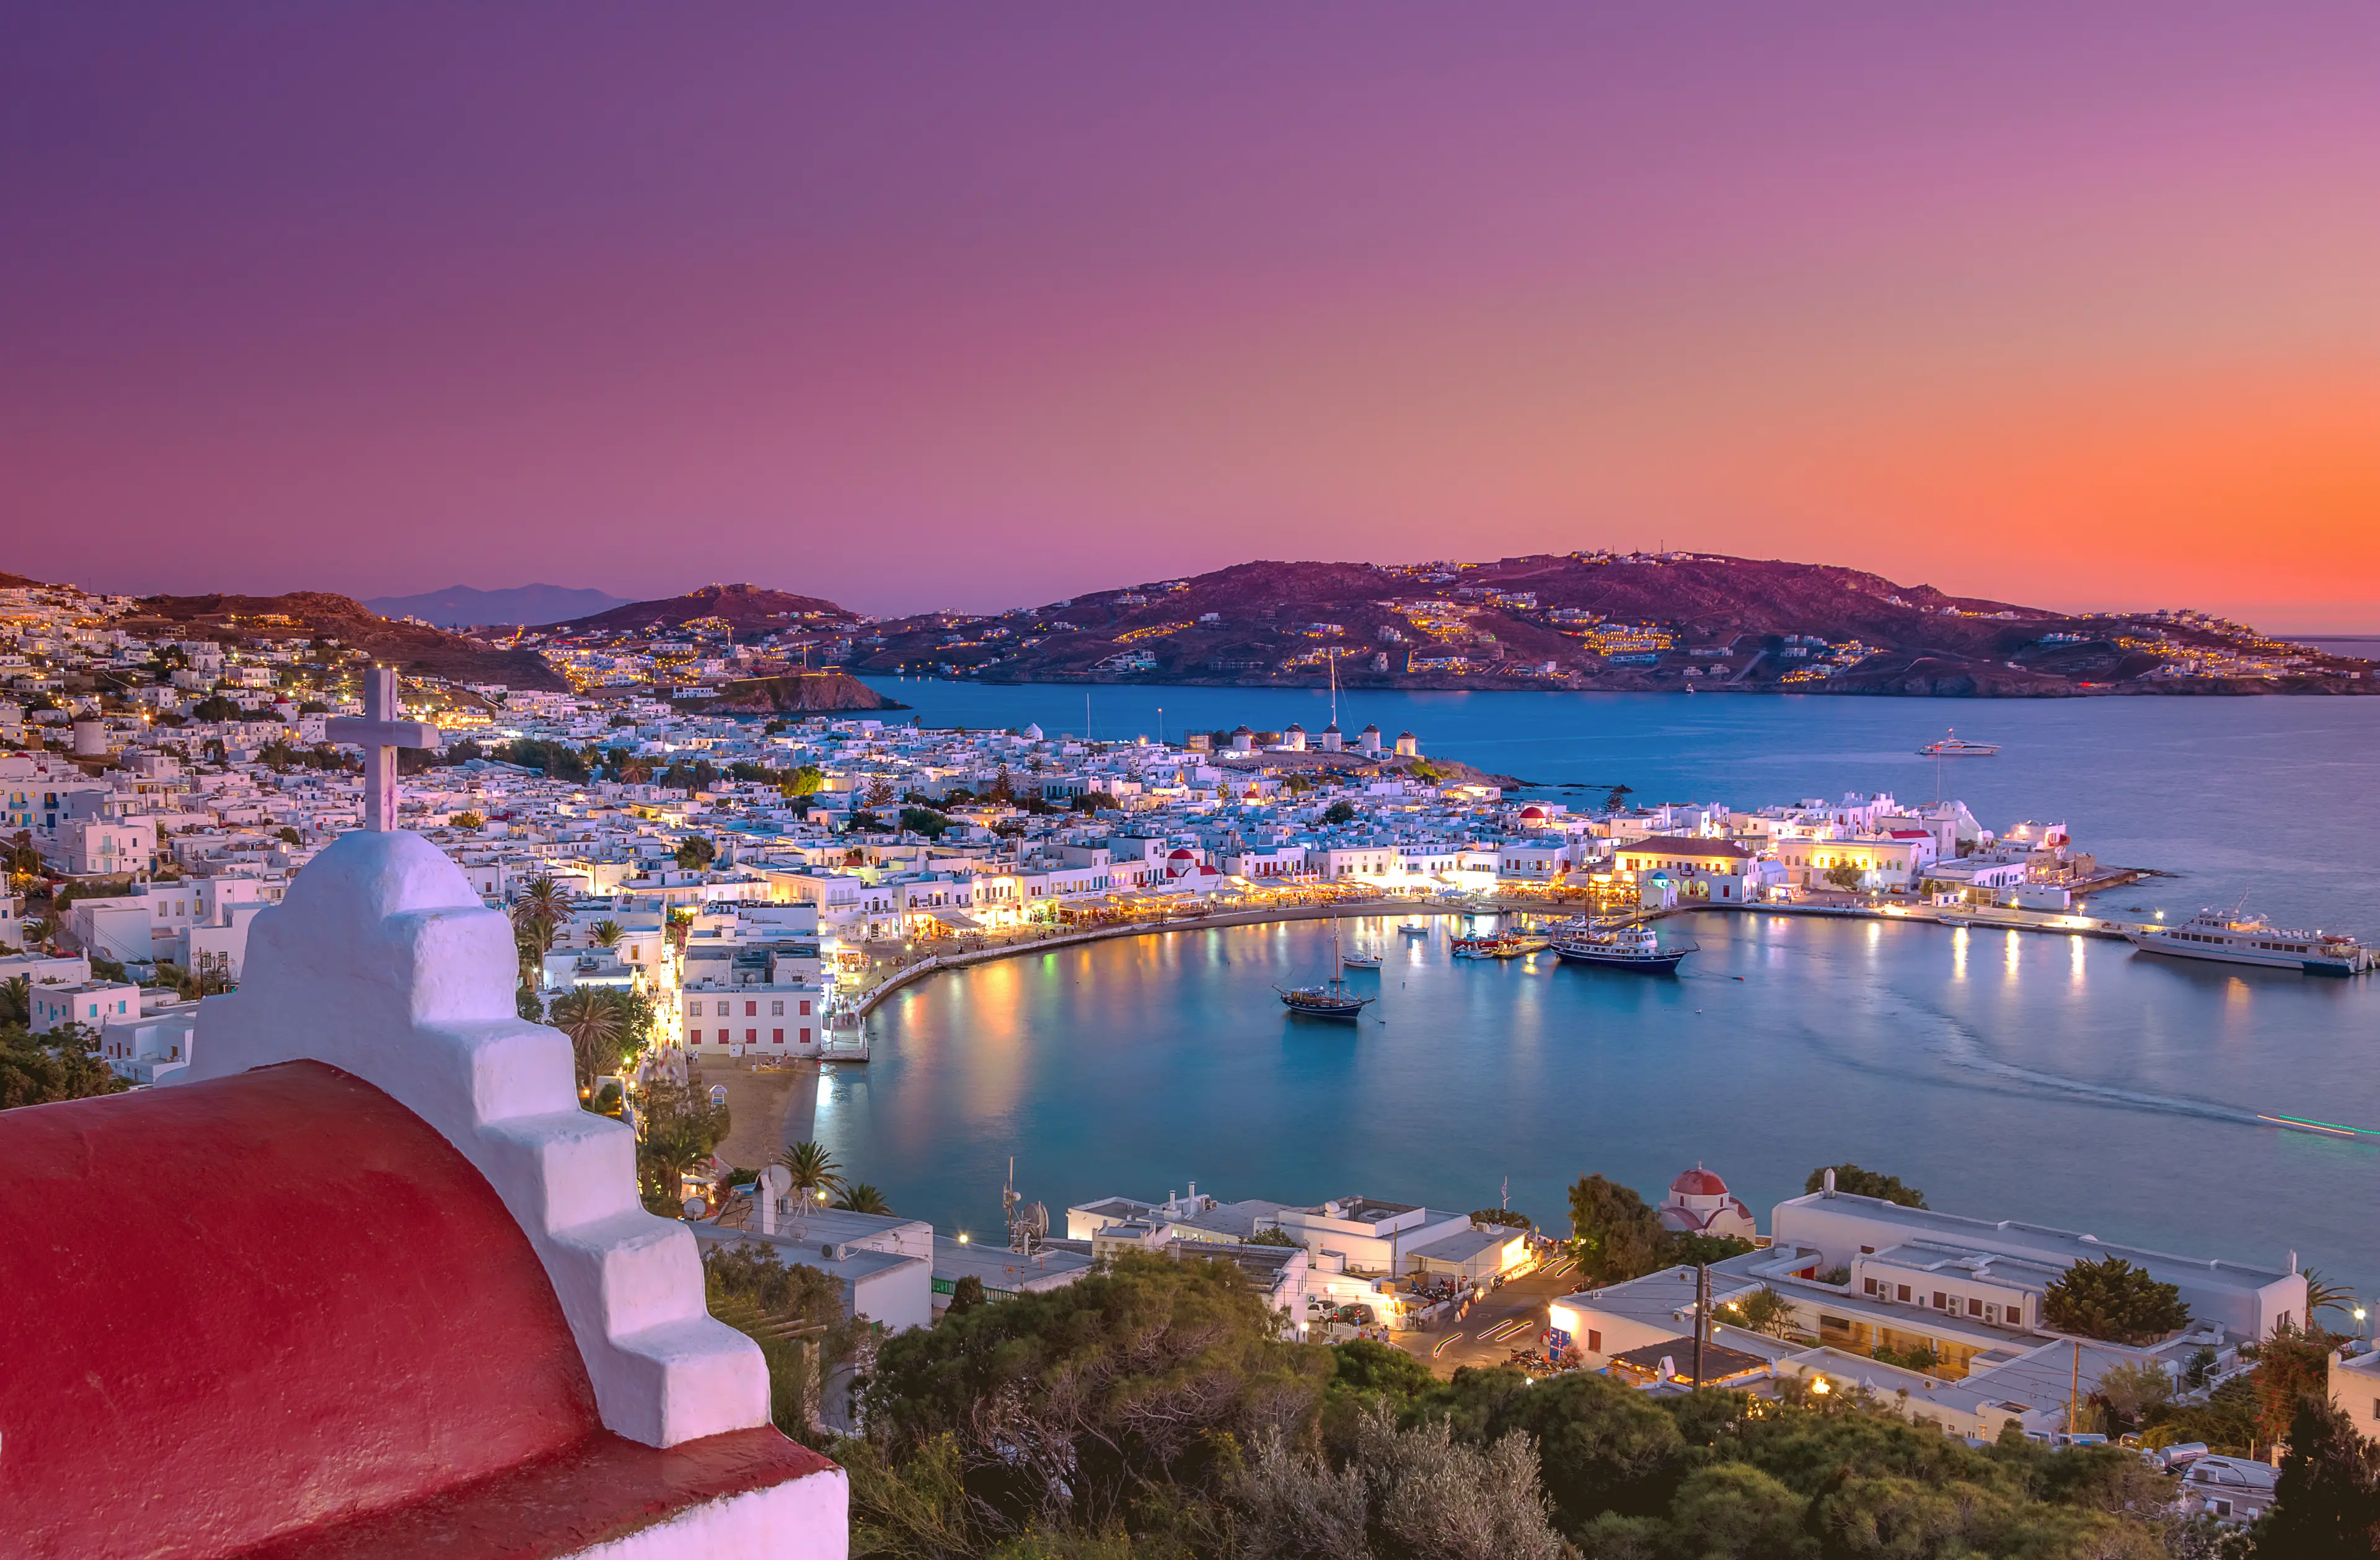 3-Day Mykonos Adventure: Outdoor Fun and Shopping with Friends